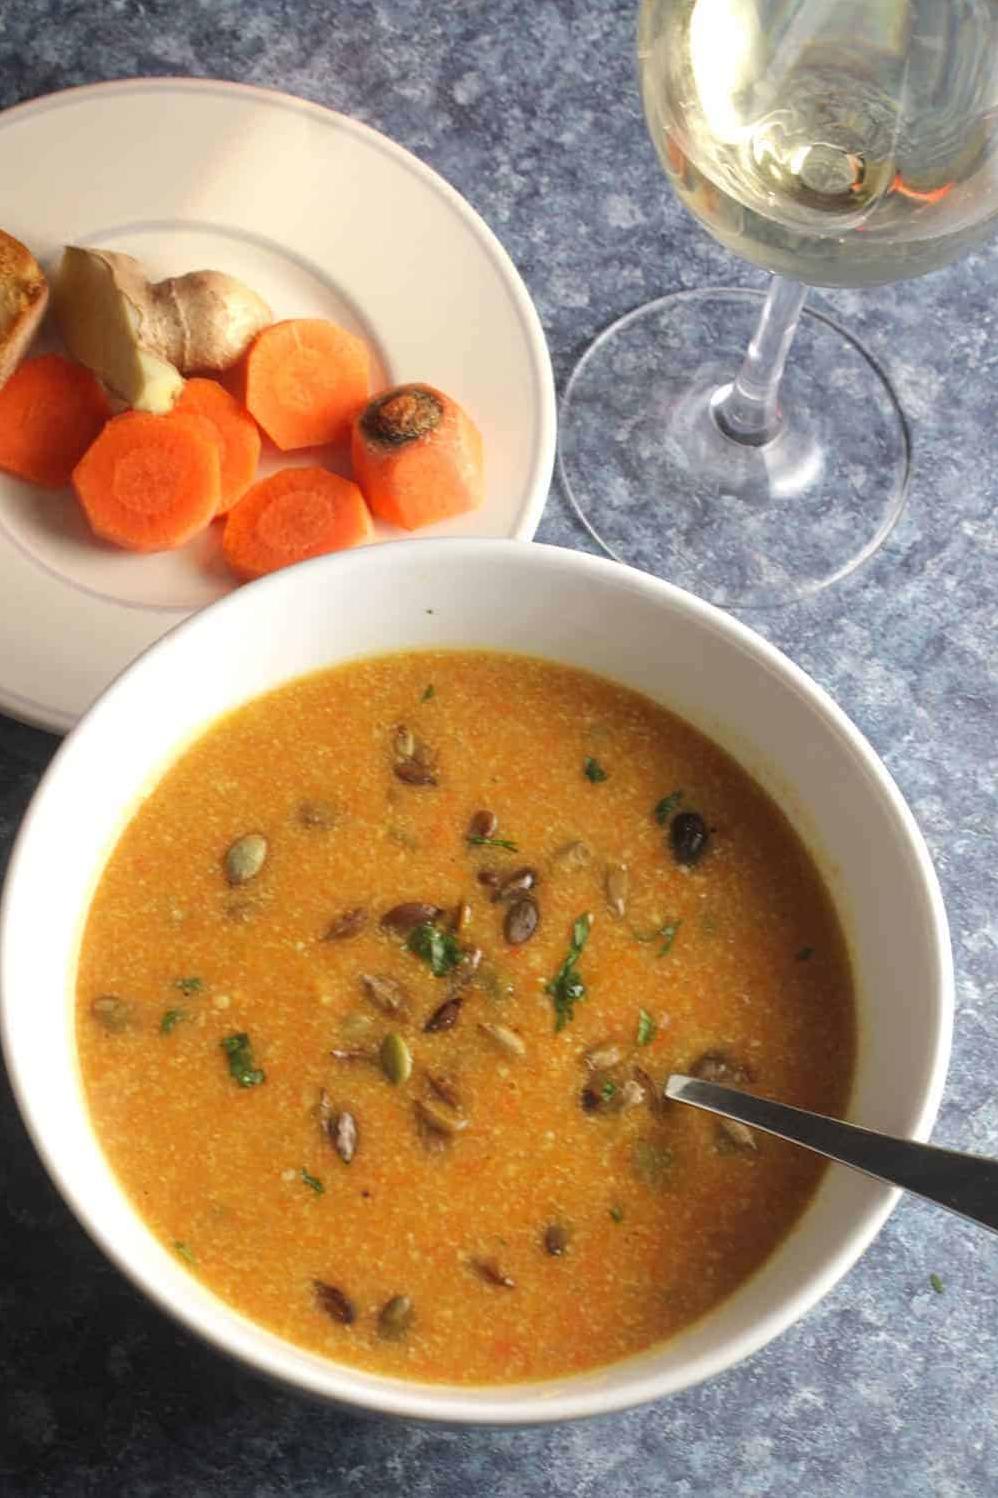  A cozy bowl of carrot and ginger soup, perfect for a chilly evening